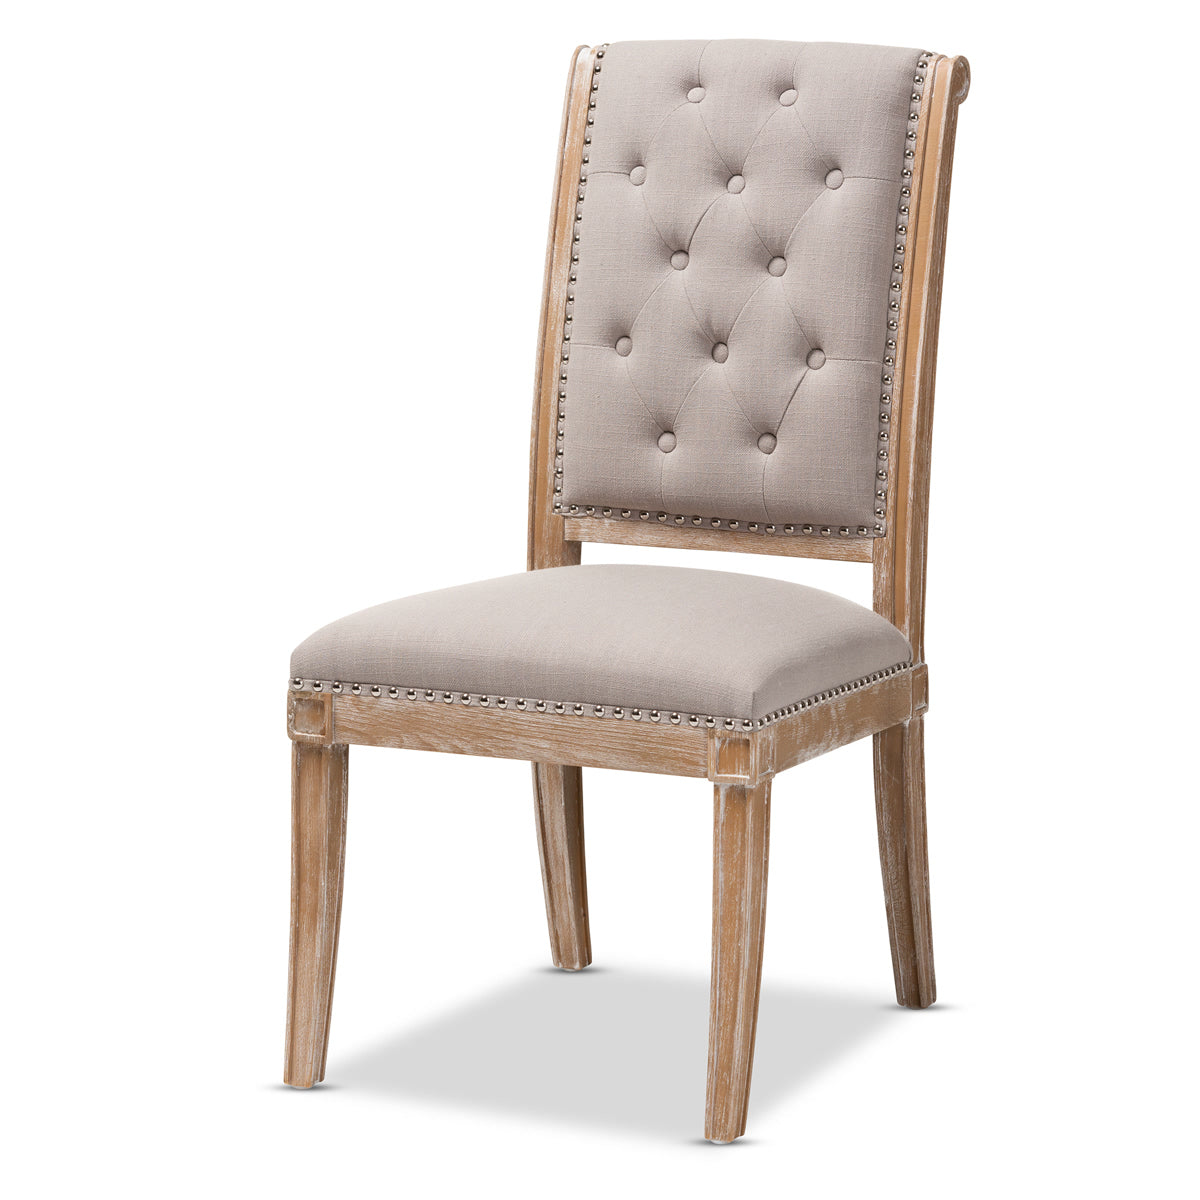 Baxton Studio Charmant French Provincial Beige Fabric Upholstered Weathered Oak Finished Wood Dining Chair Baxton Studio-dining chair-Minimal And Modern - 1